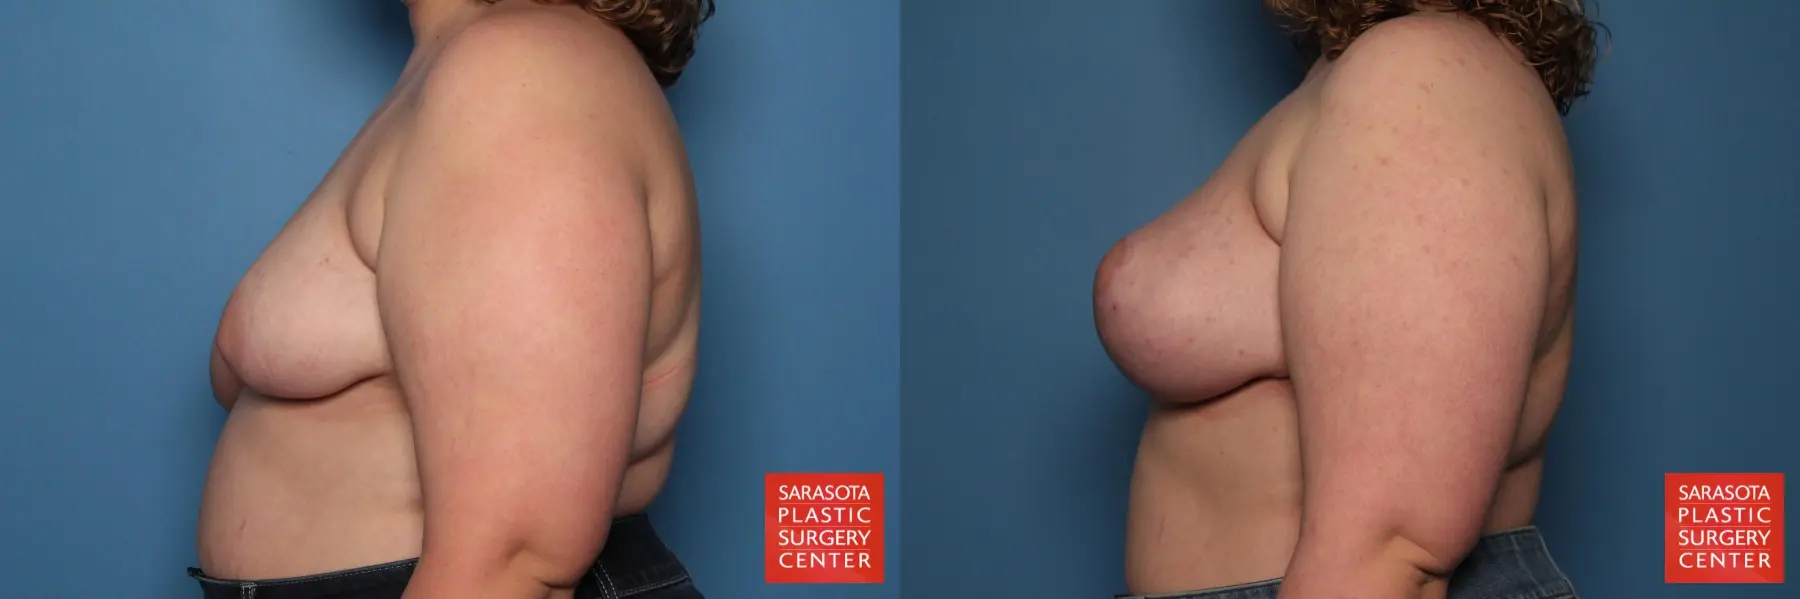 Breast Asymmetry: Patient 1 - Before and After 3